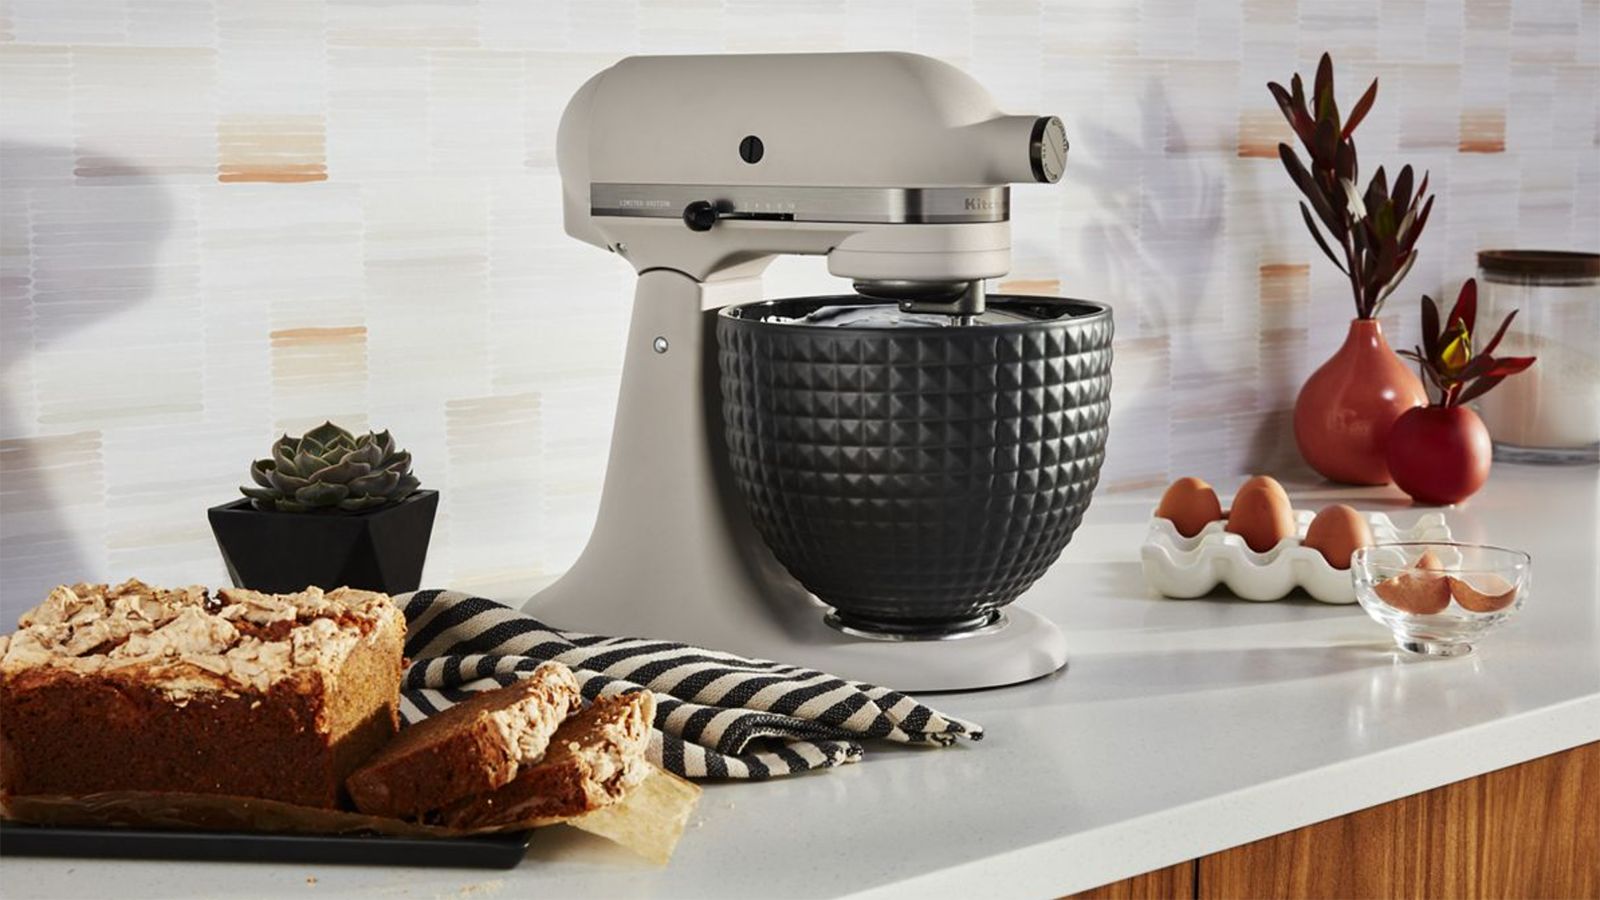 The best deals on KitchenAid mixers this Cyber Monday 2021